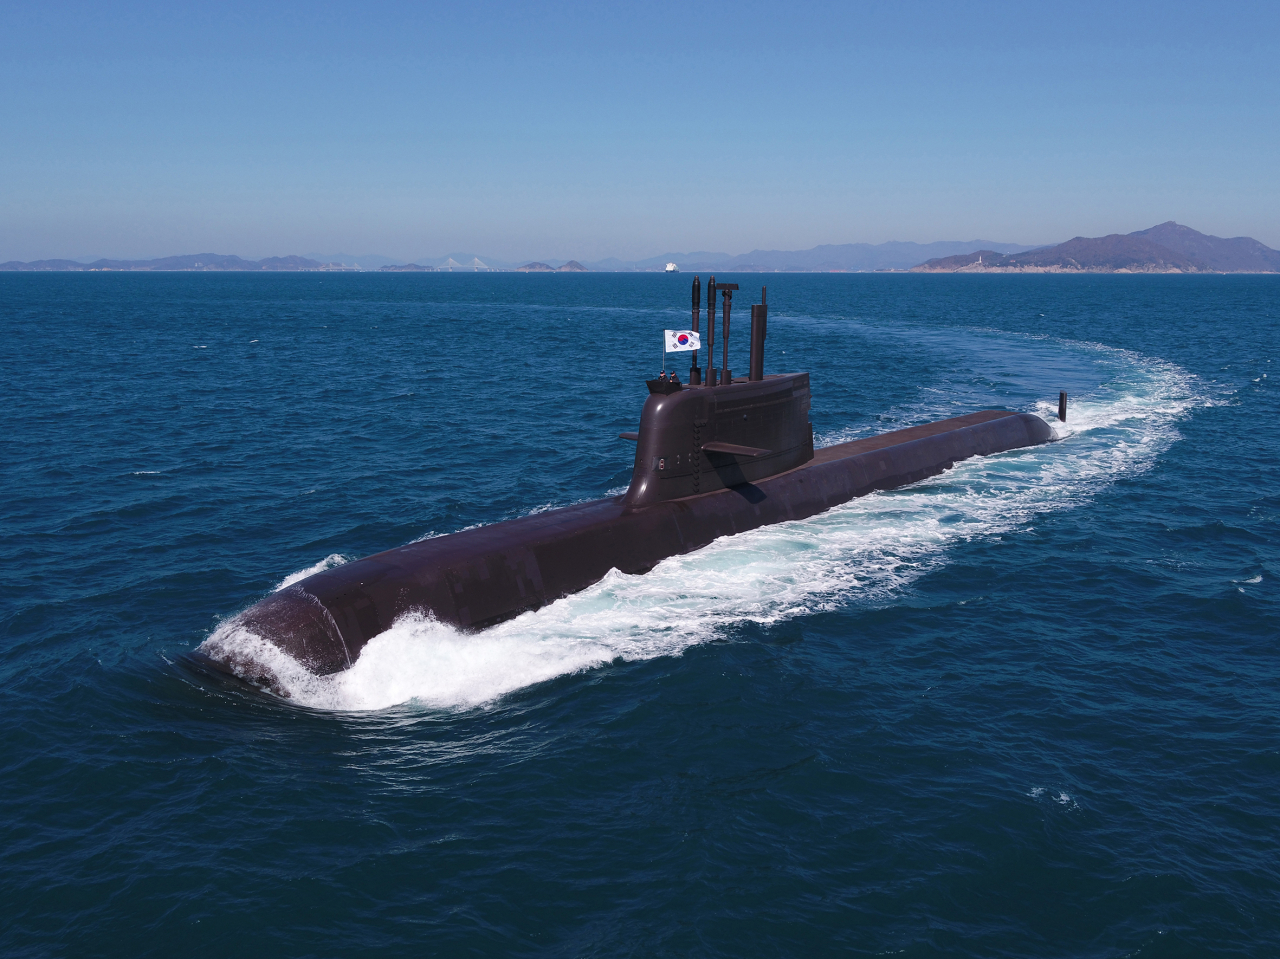 Two of the latest KSS-III (Korean Submarine-III) submarines, designed and constructed by Hanwha Ocean, were delivered to the Republic of Korea Navy in 2021 and 2023, respectively. (Hanwha Ocean)